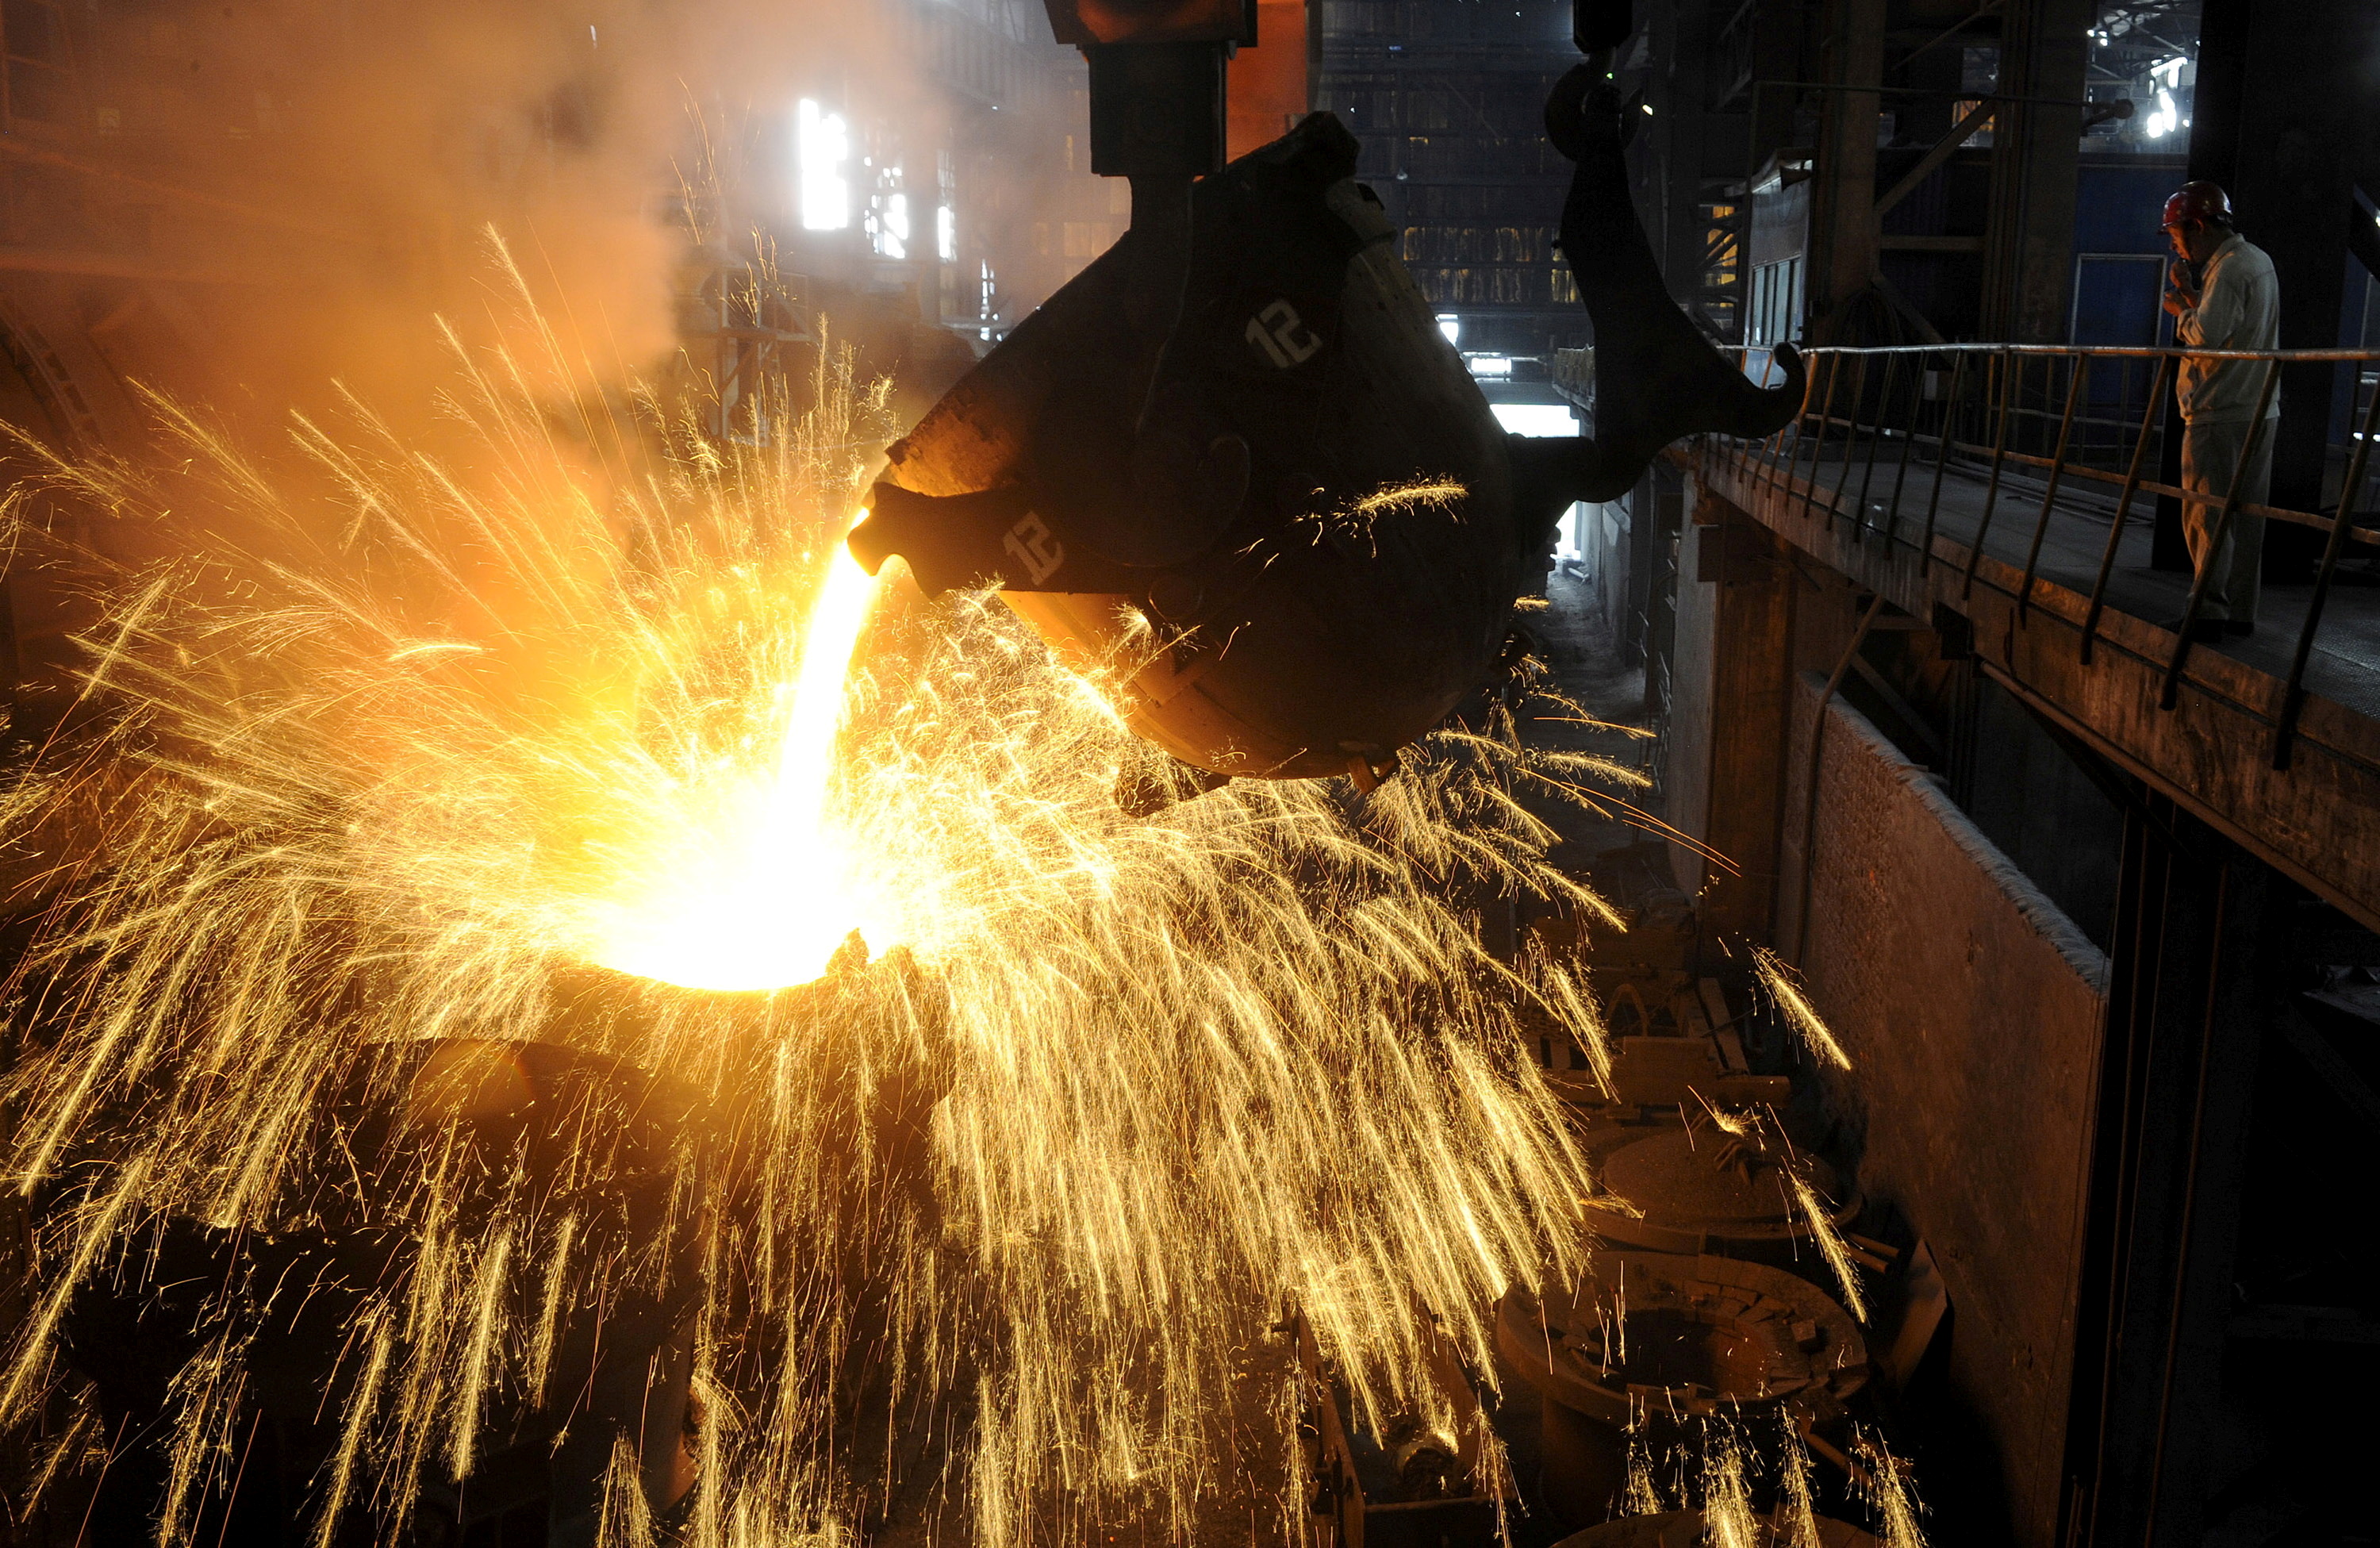 An employee monitors molten iron being poured into a container at a steel plant in Hefei